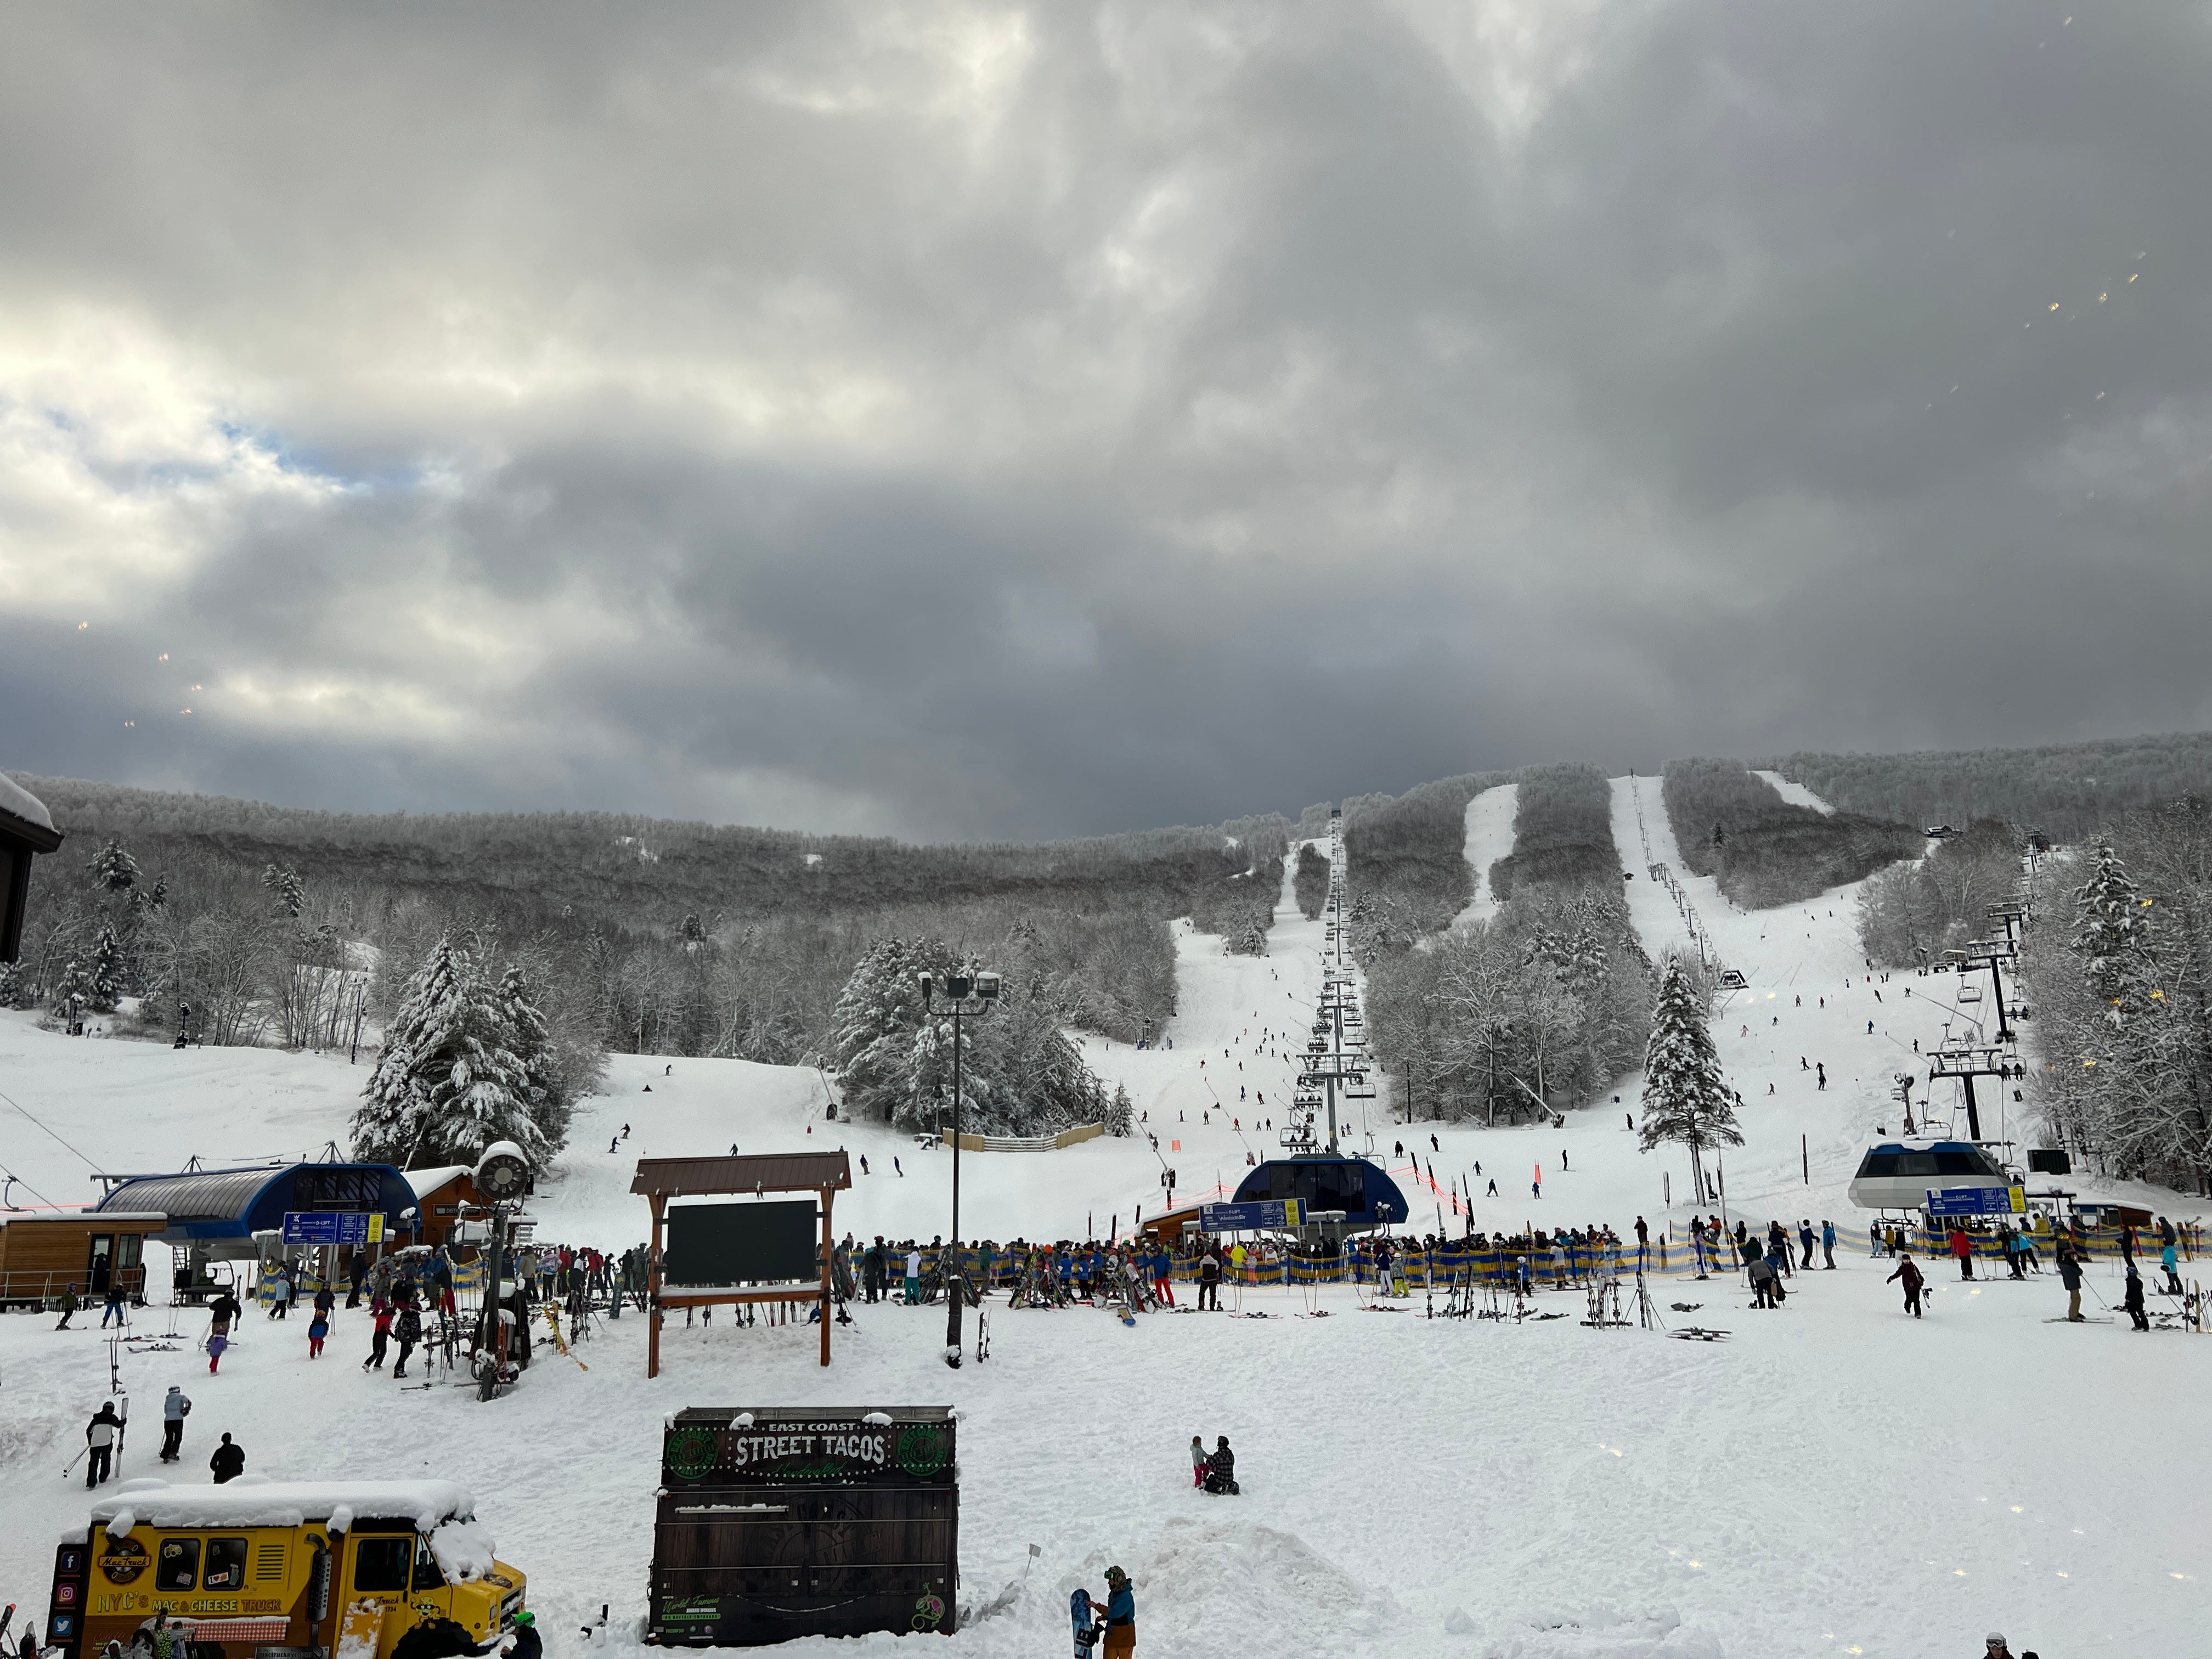 Long lines at lift - over crowded - Review of Jack Frost Mountain